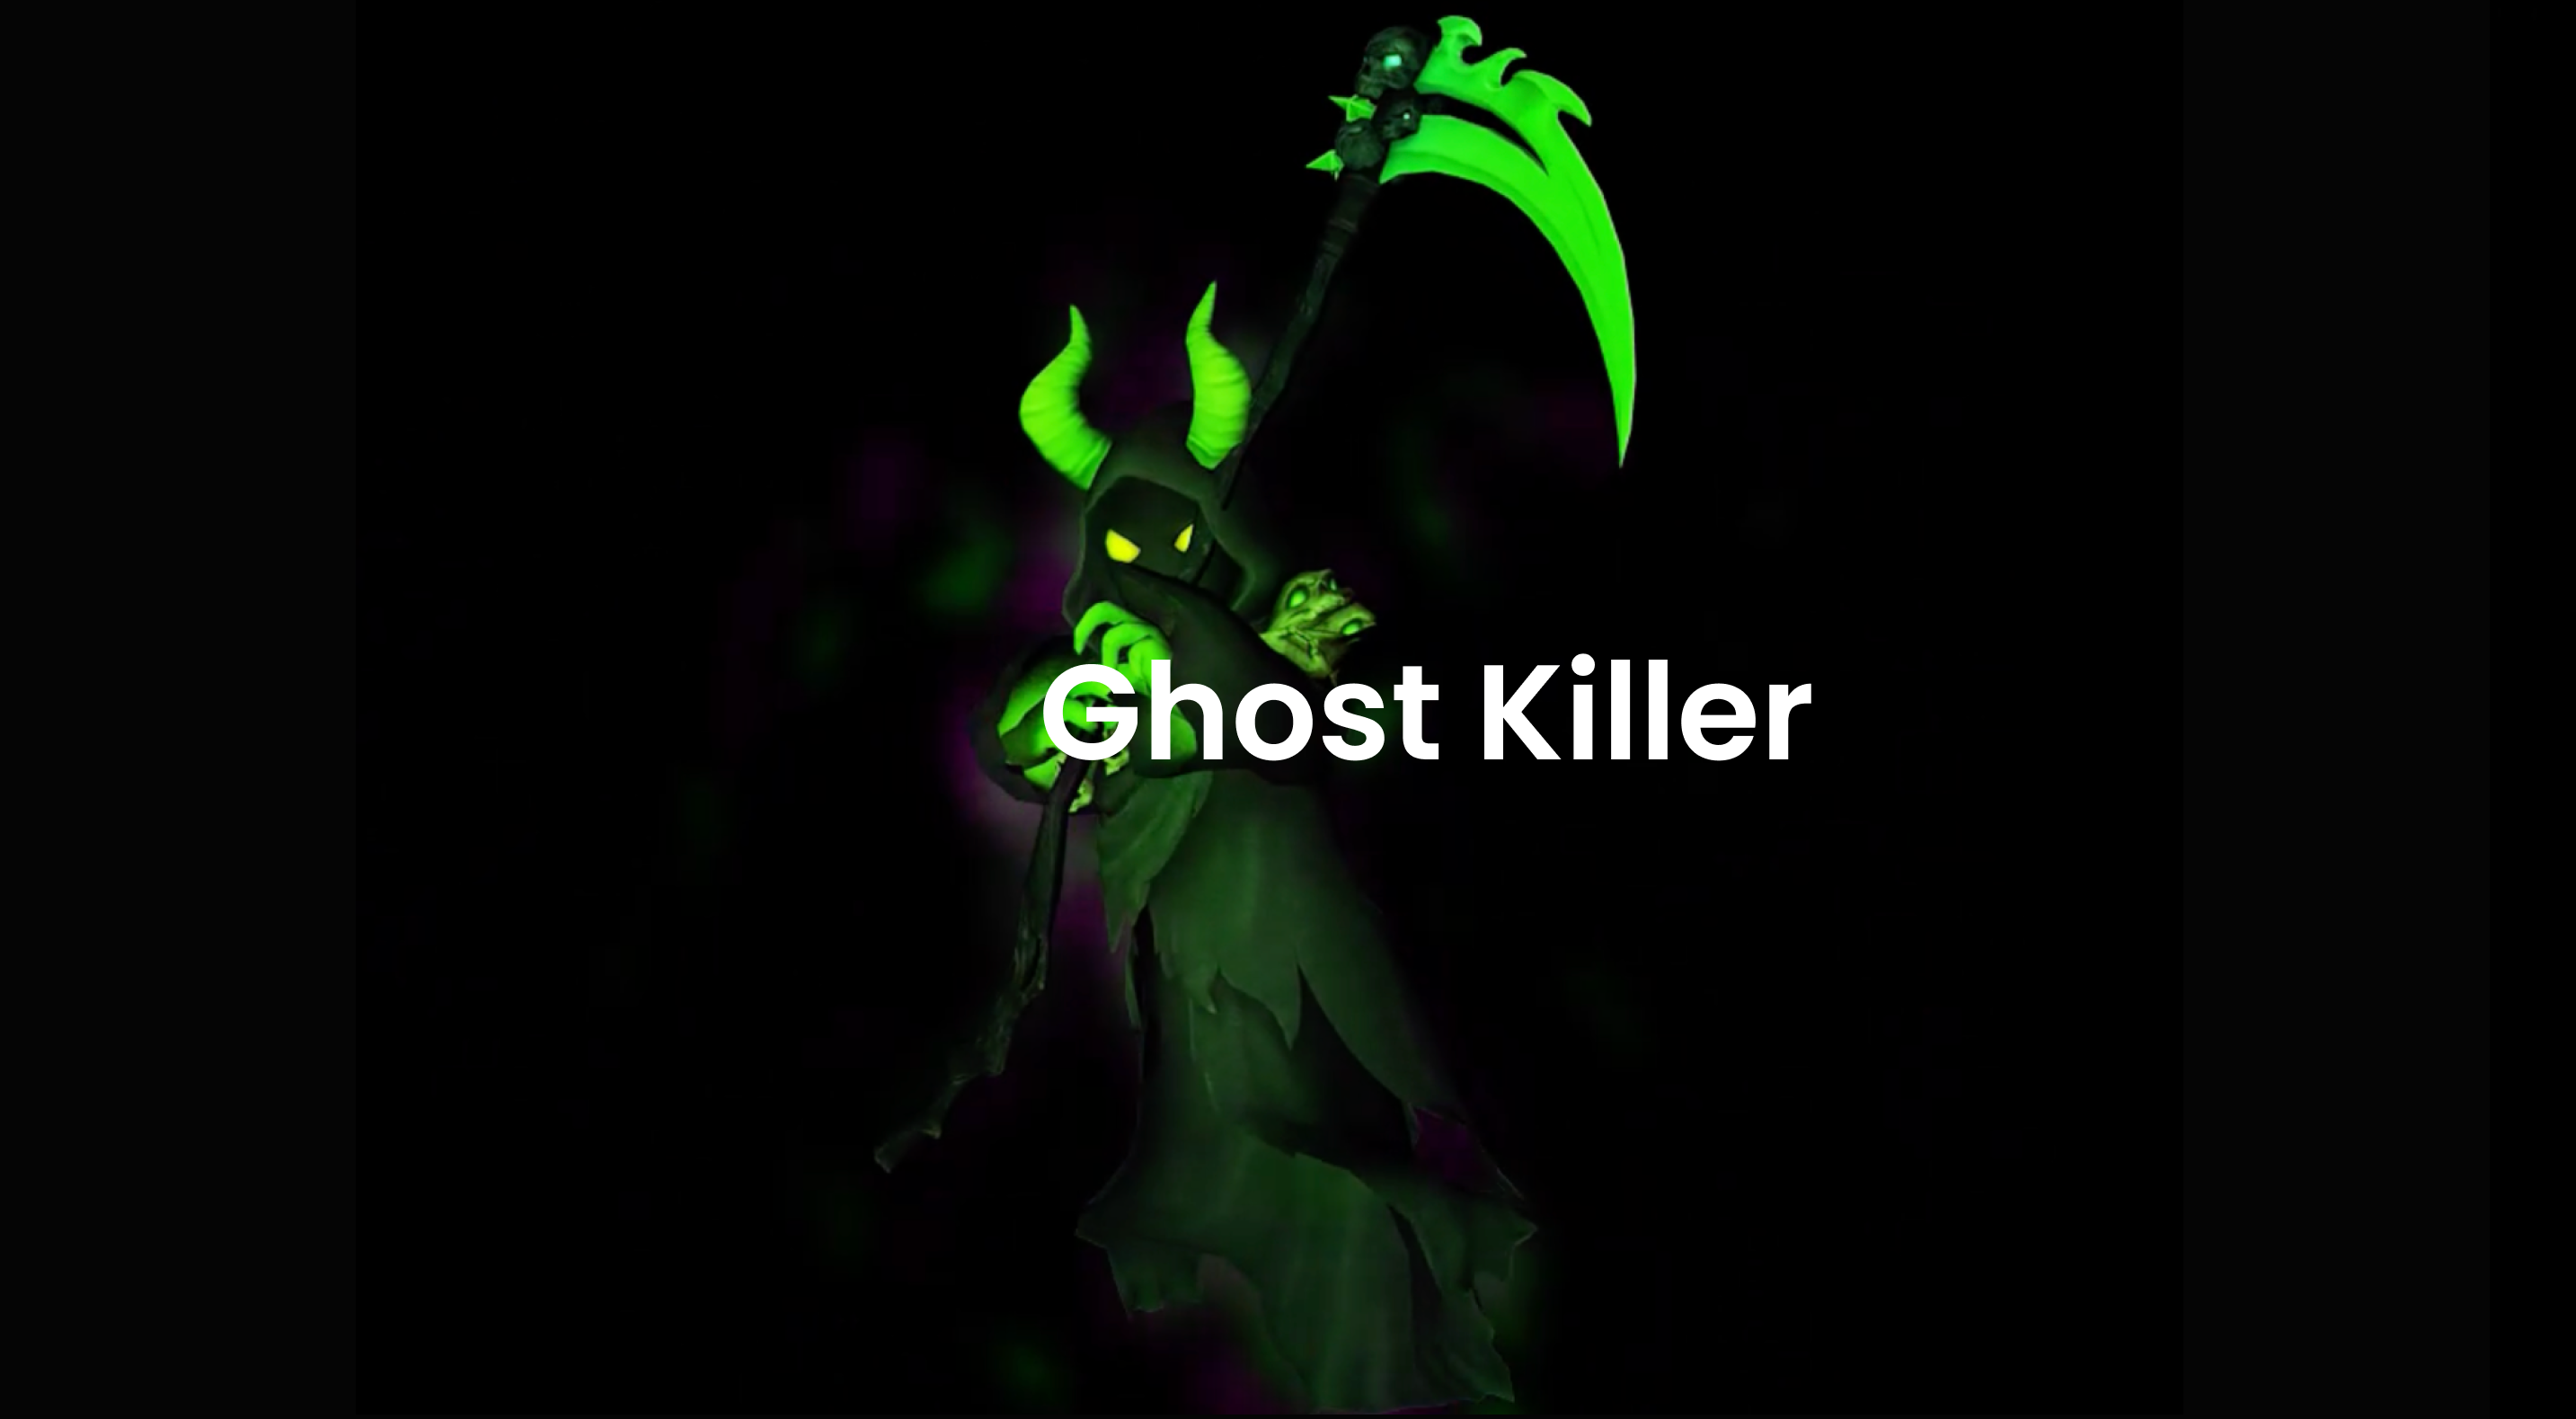 Ghost Killer Halloween Digital Decorations for Haunted House